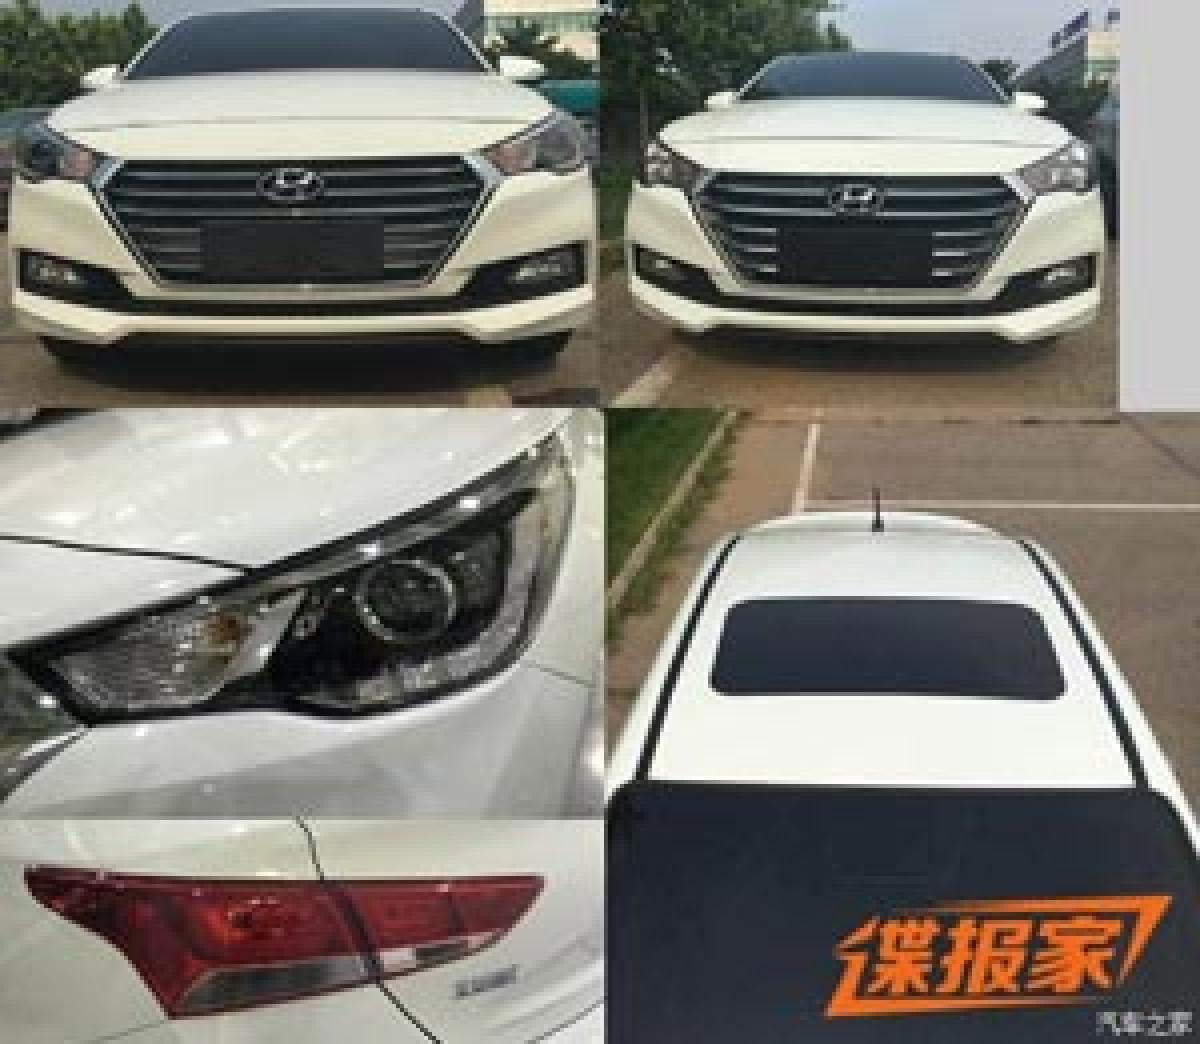 Hyundai Verna 2017 completely revealed in images